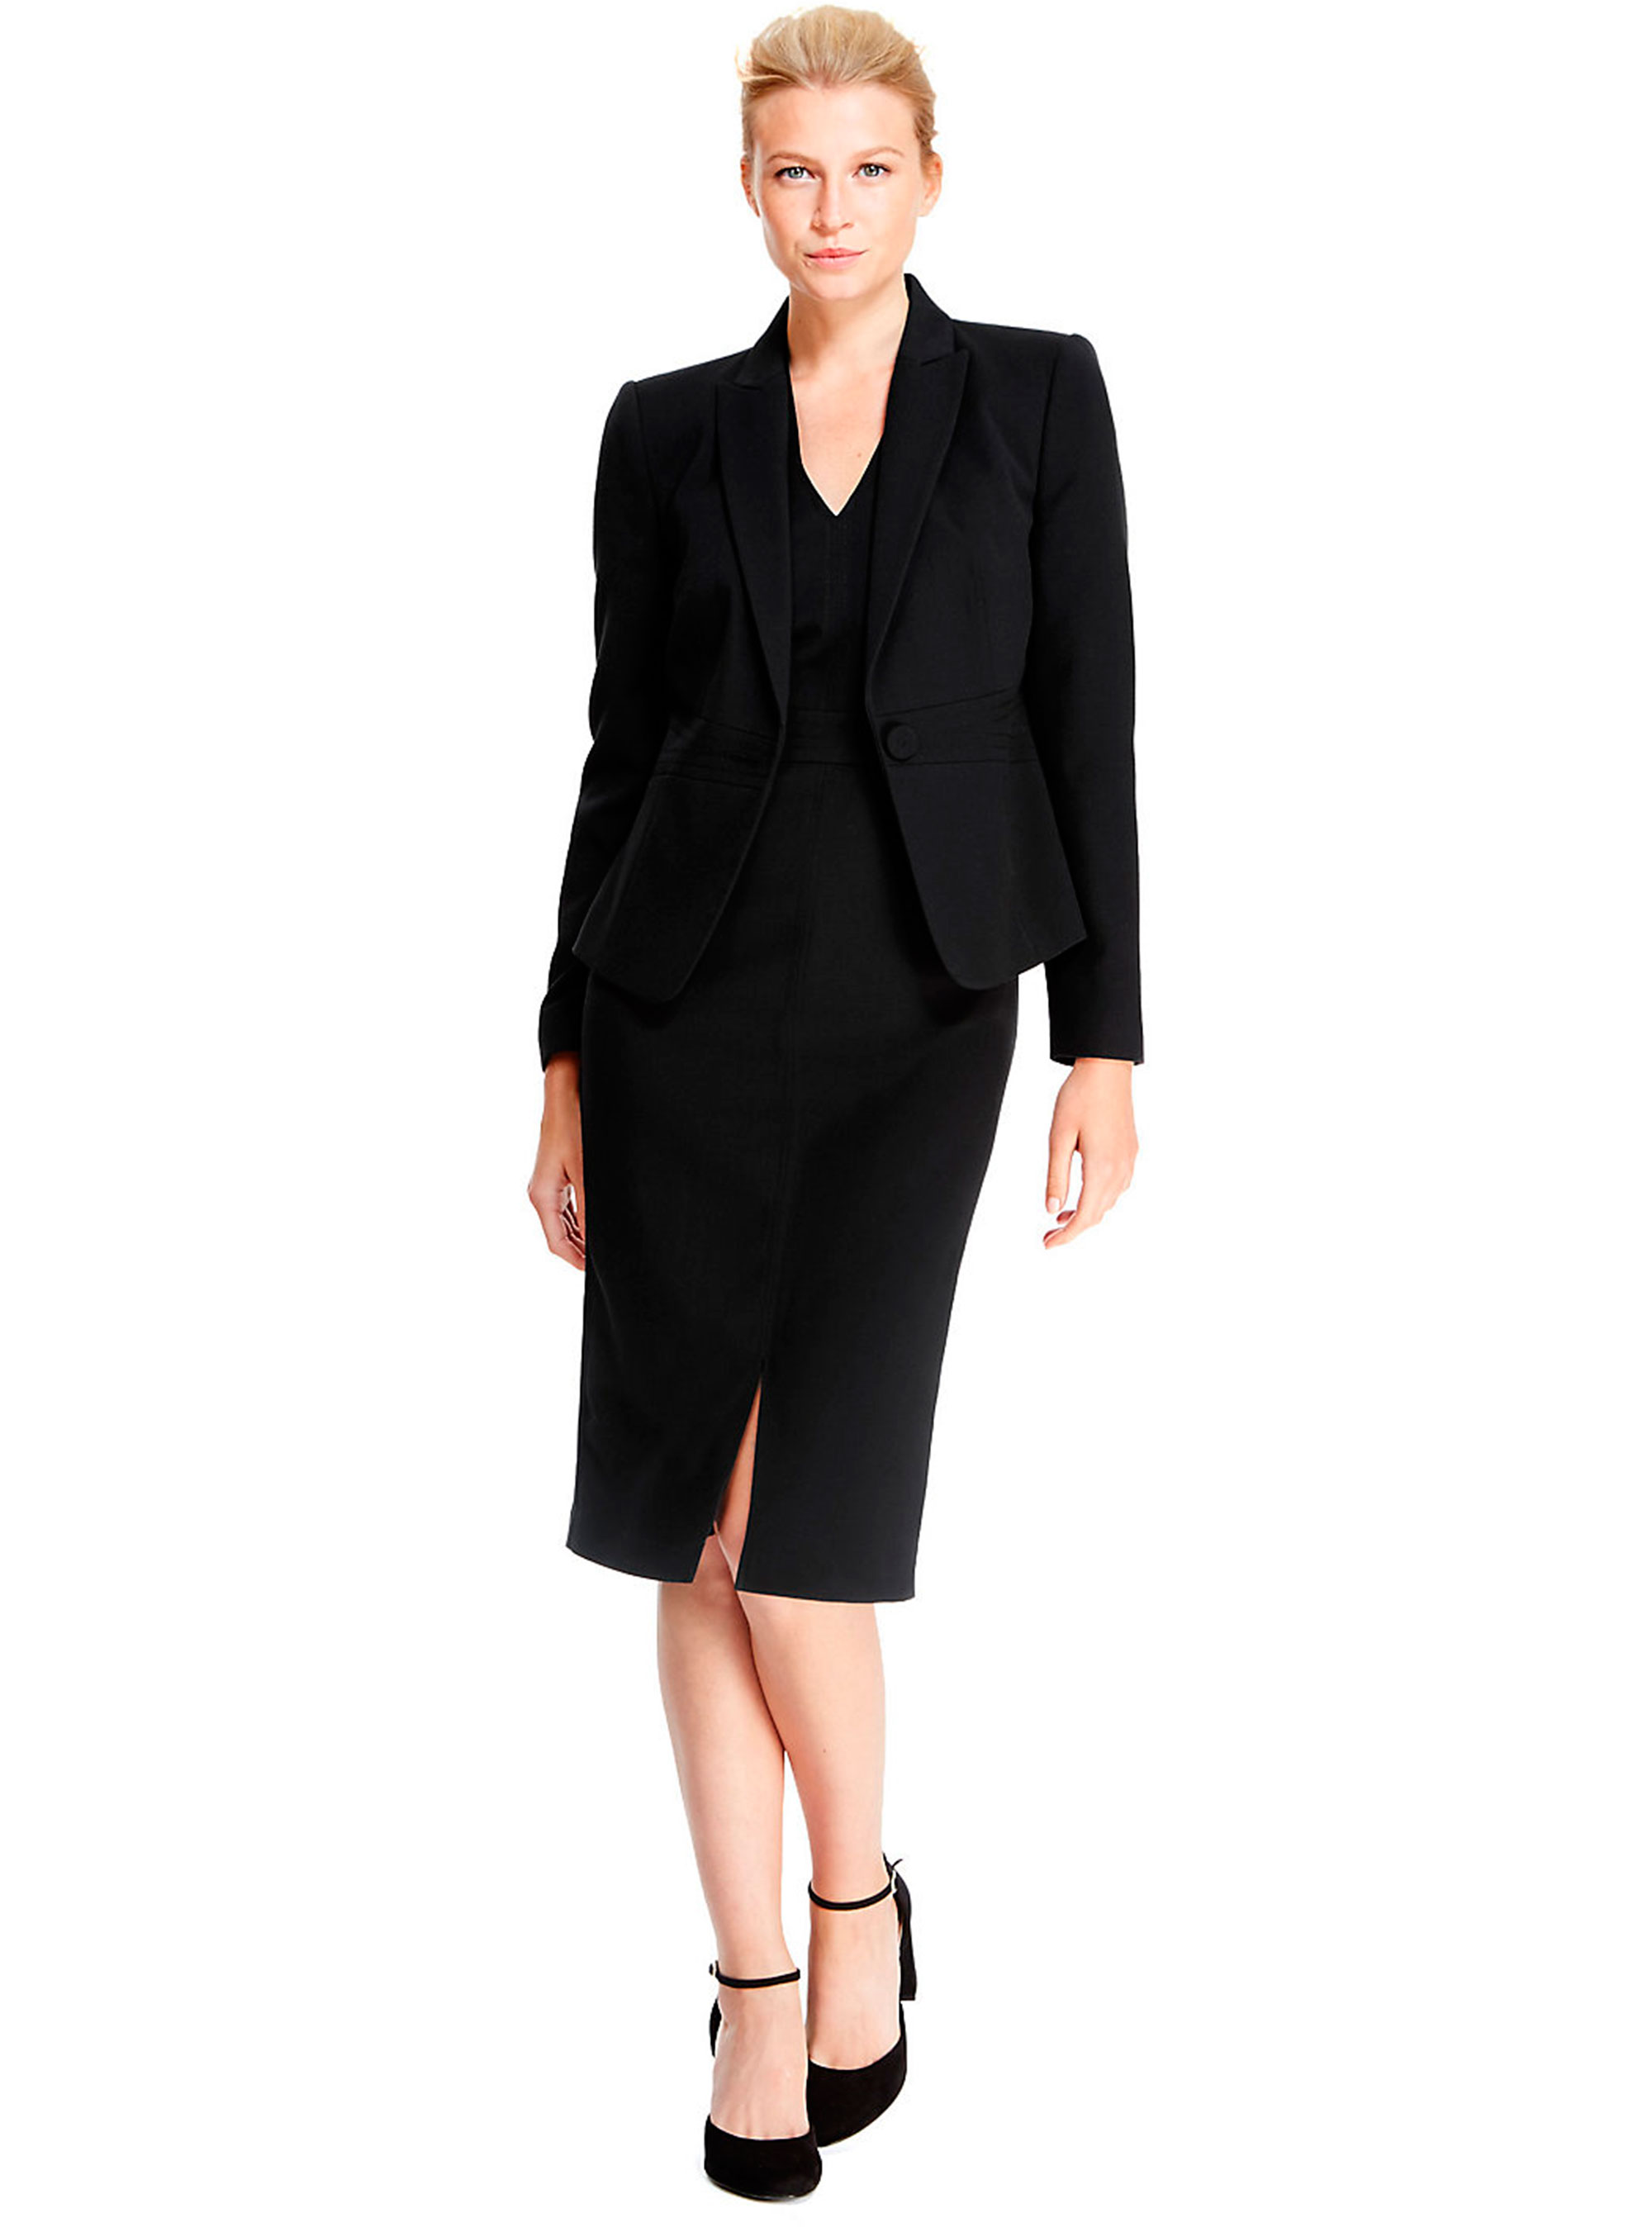 what to wear to an interview - Suits you - Woman And Home